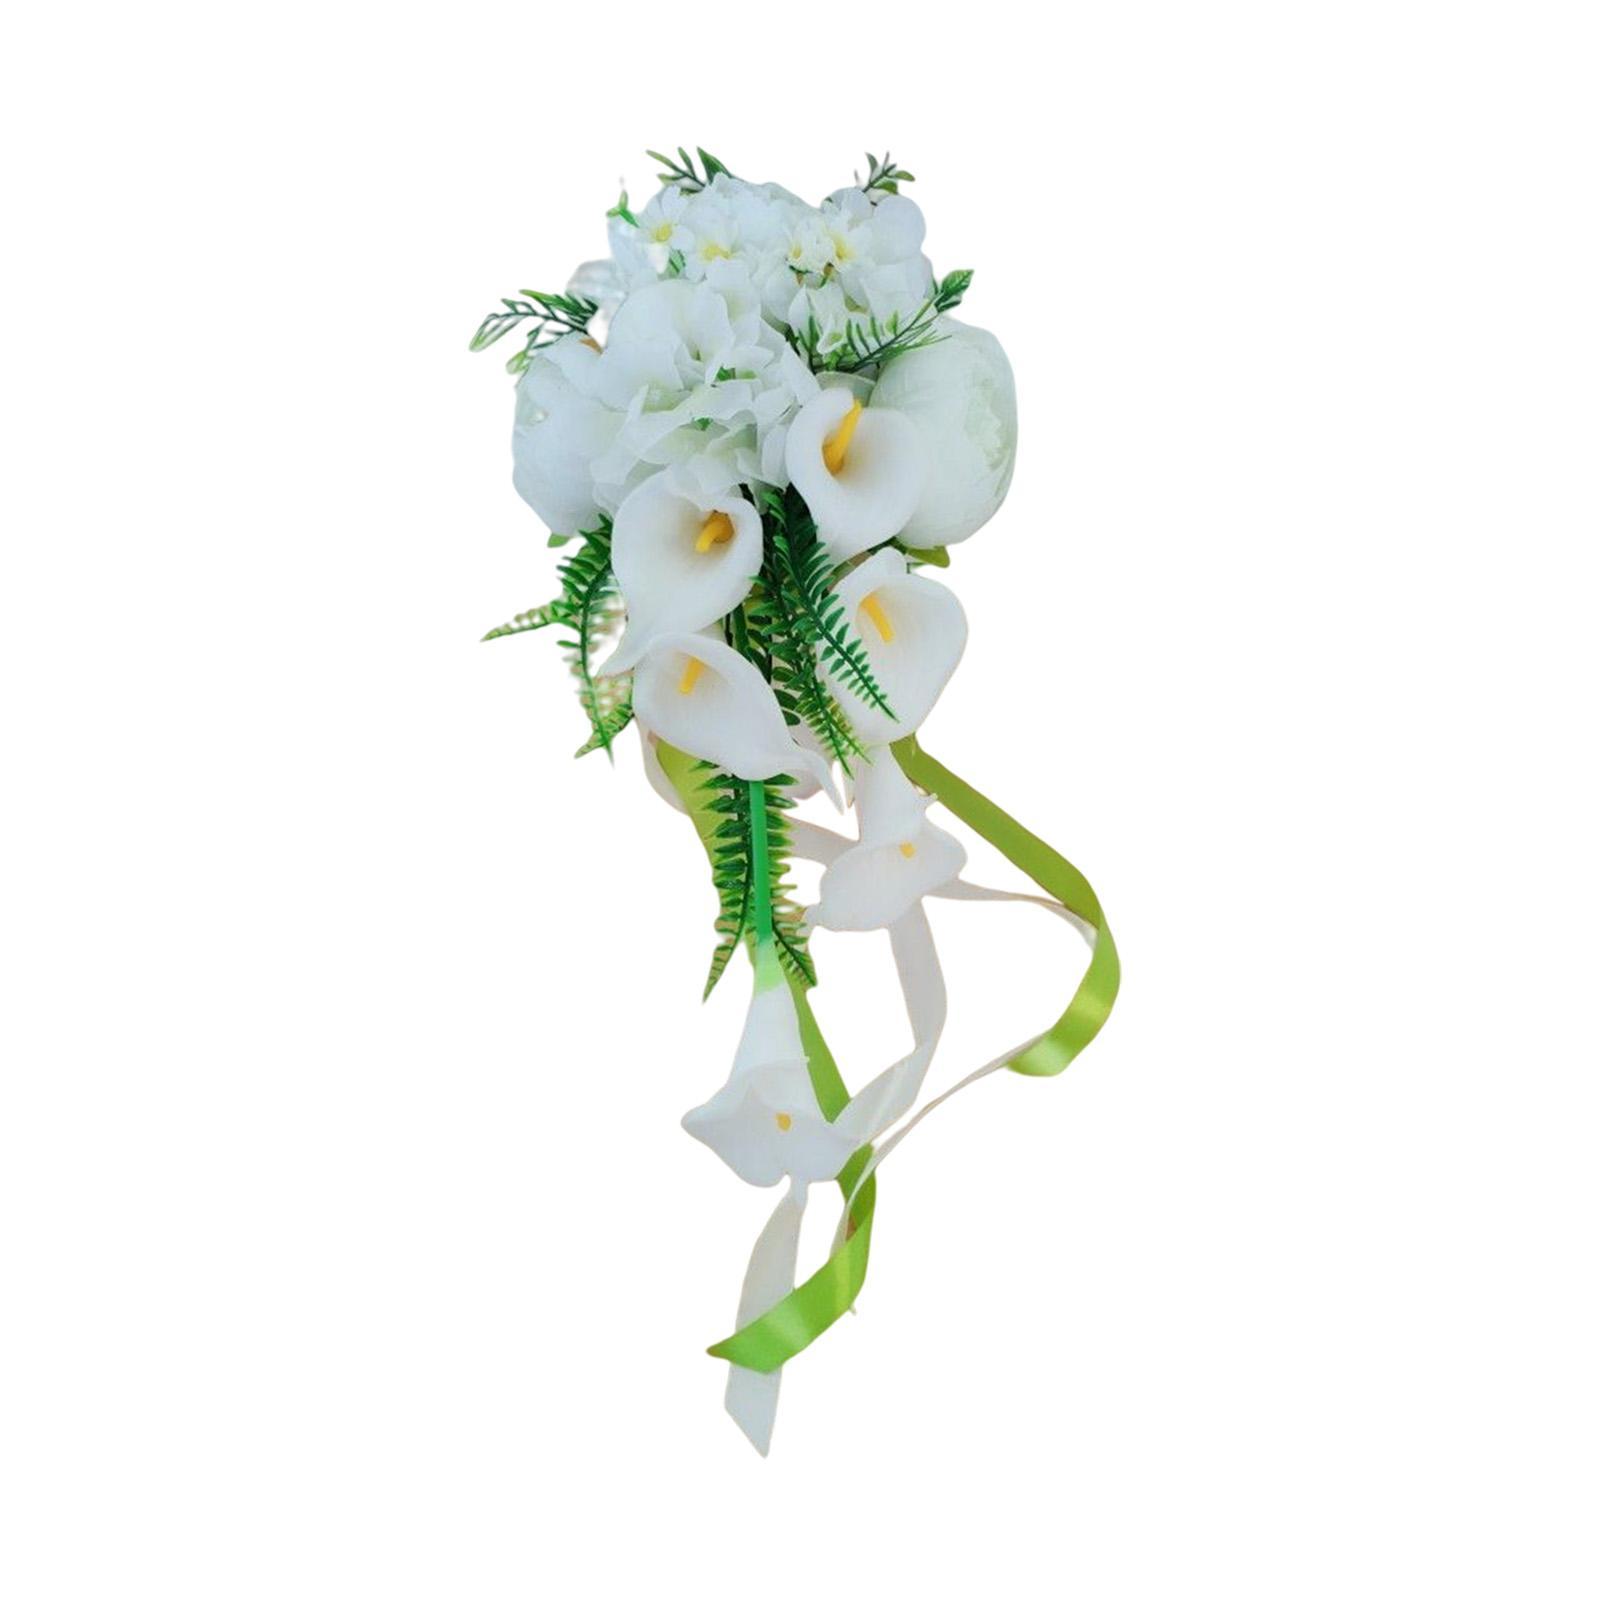 Romantic Wedding Bouquets for Bride Artificial Roses Bunch Floral Holding